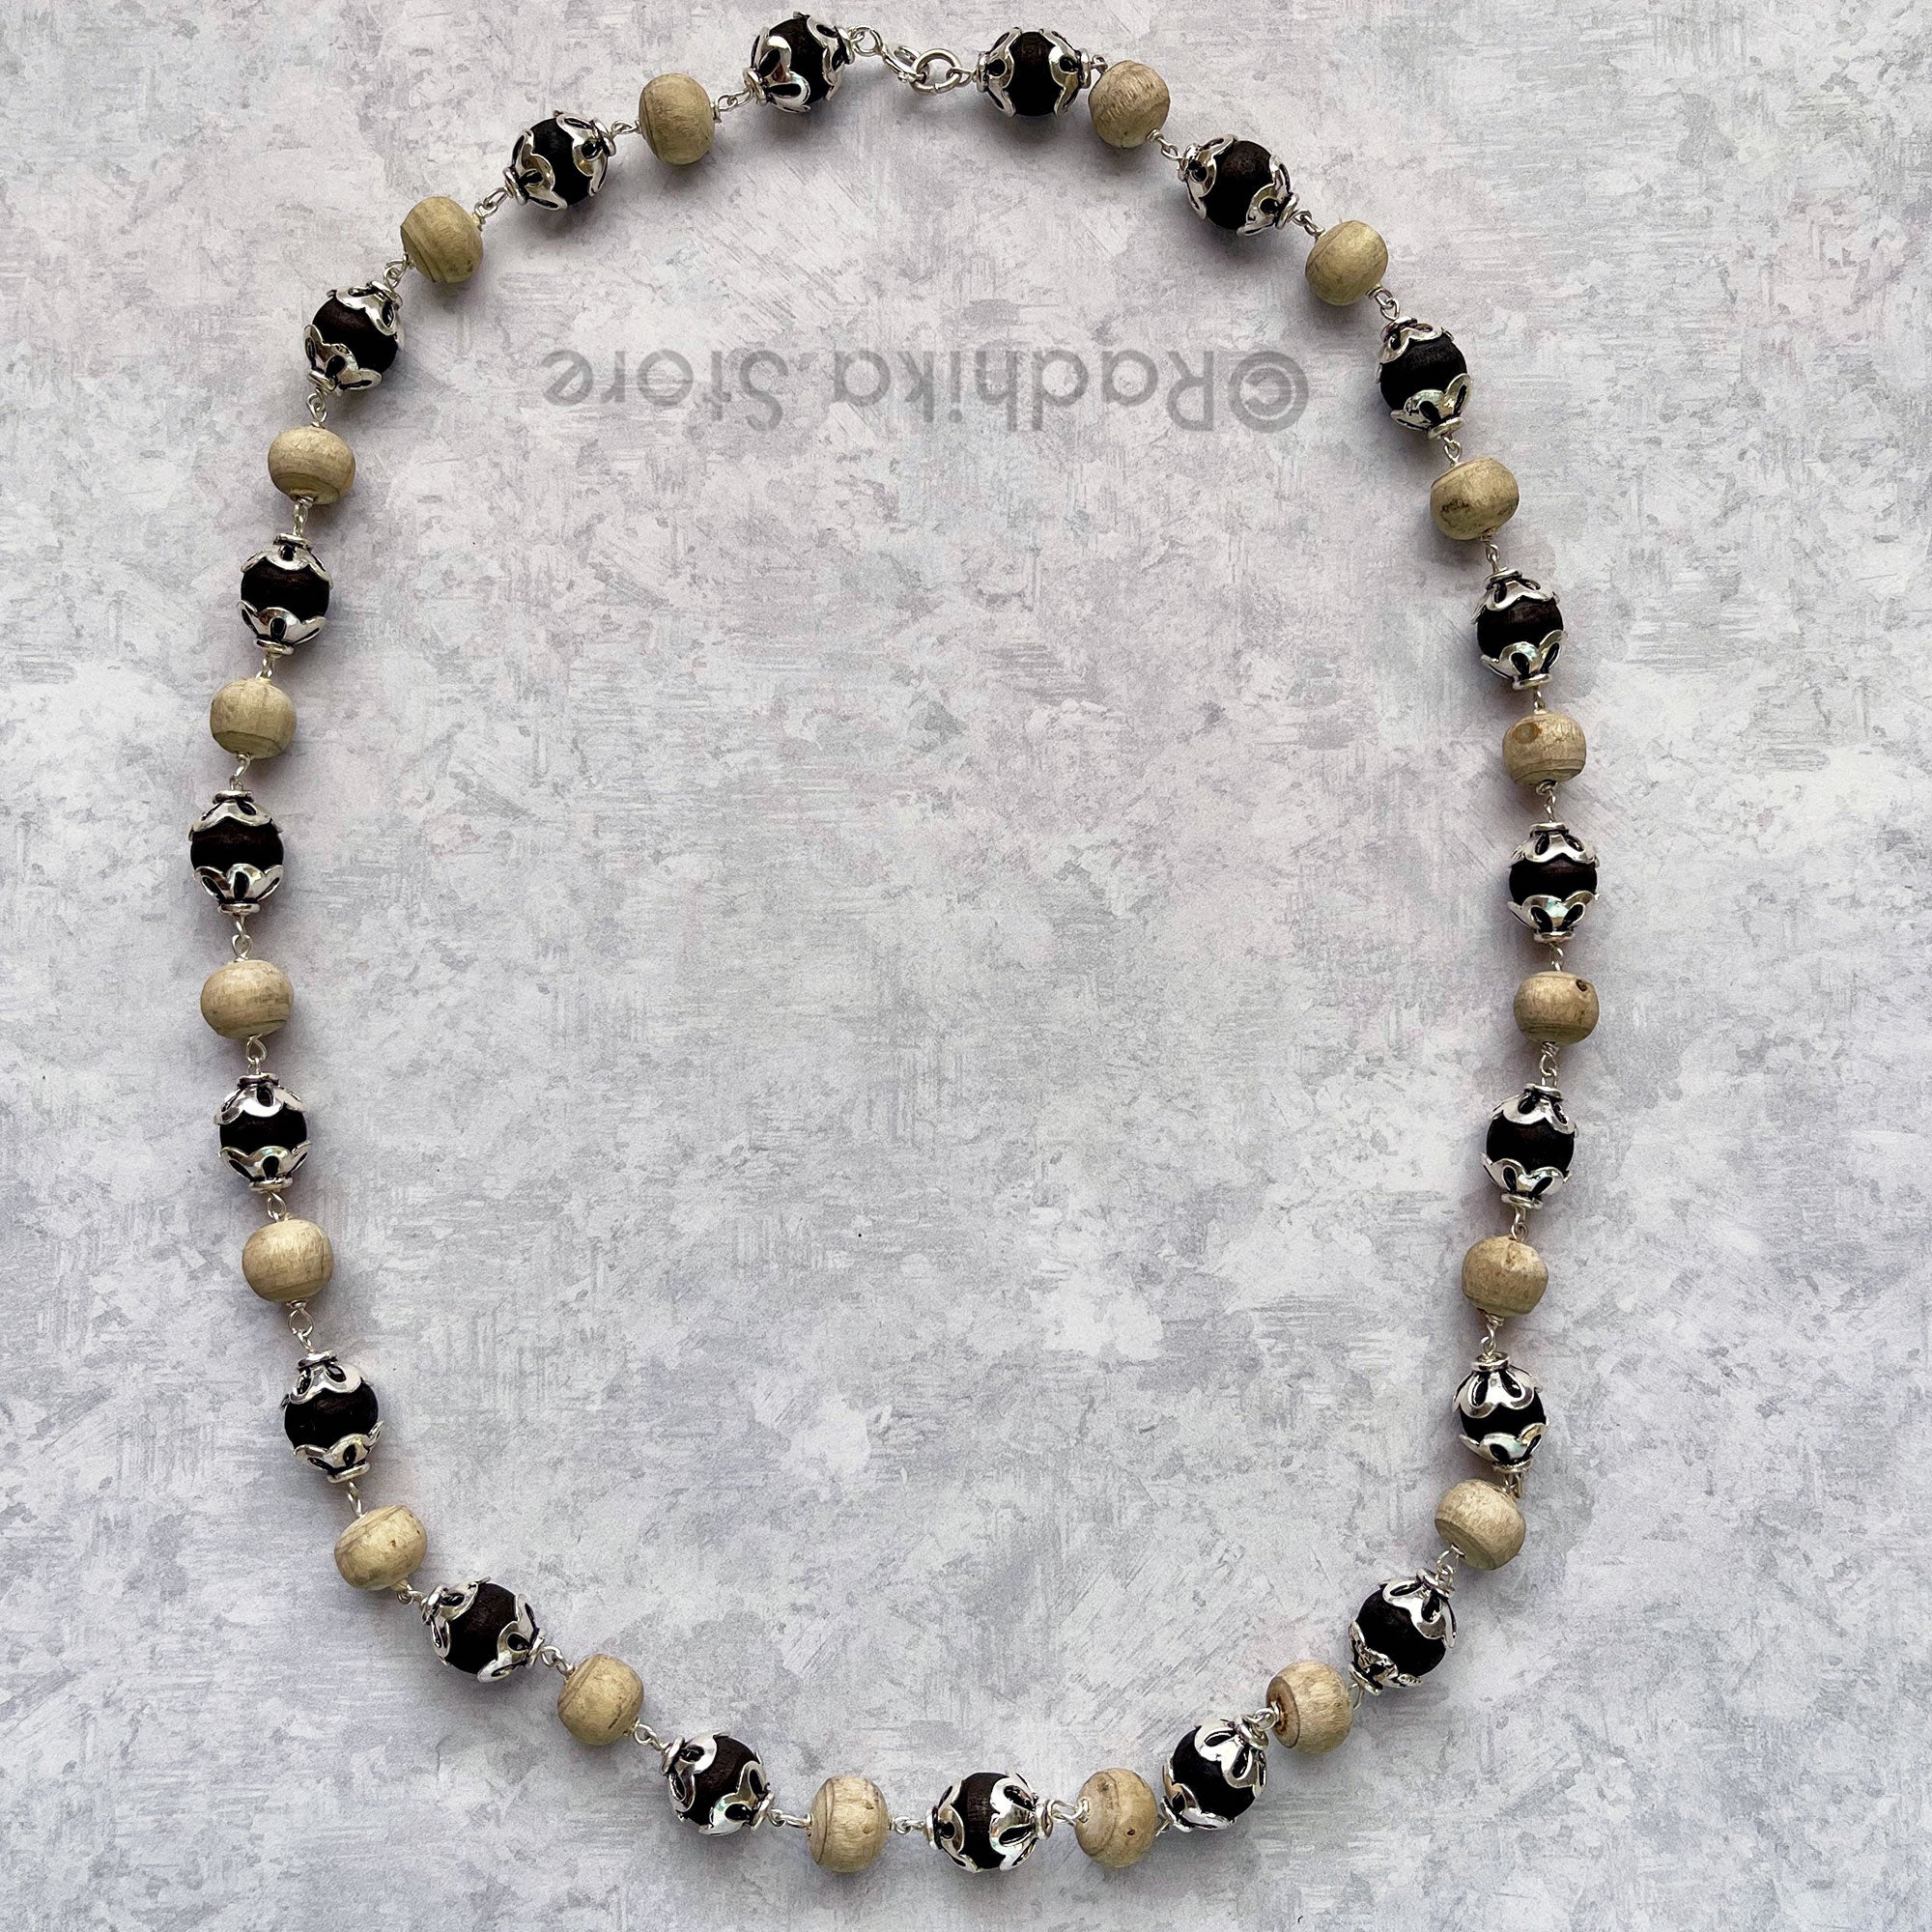 Exclusive Design - 3mm- Black and Natural - Tulsi Silver Necklace 24 Inch